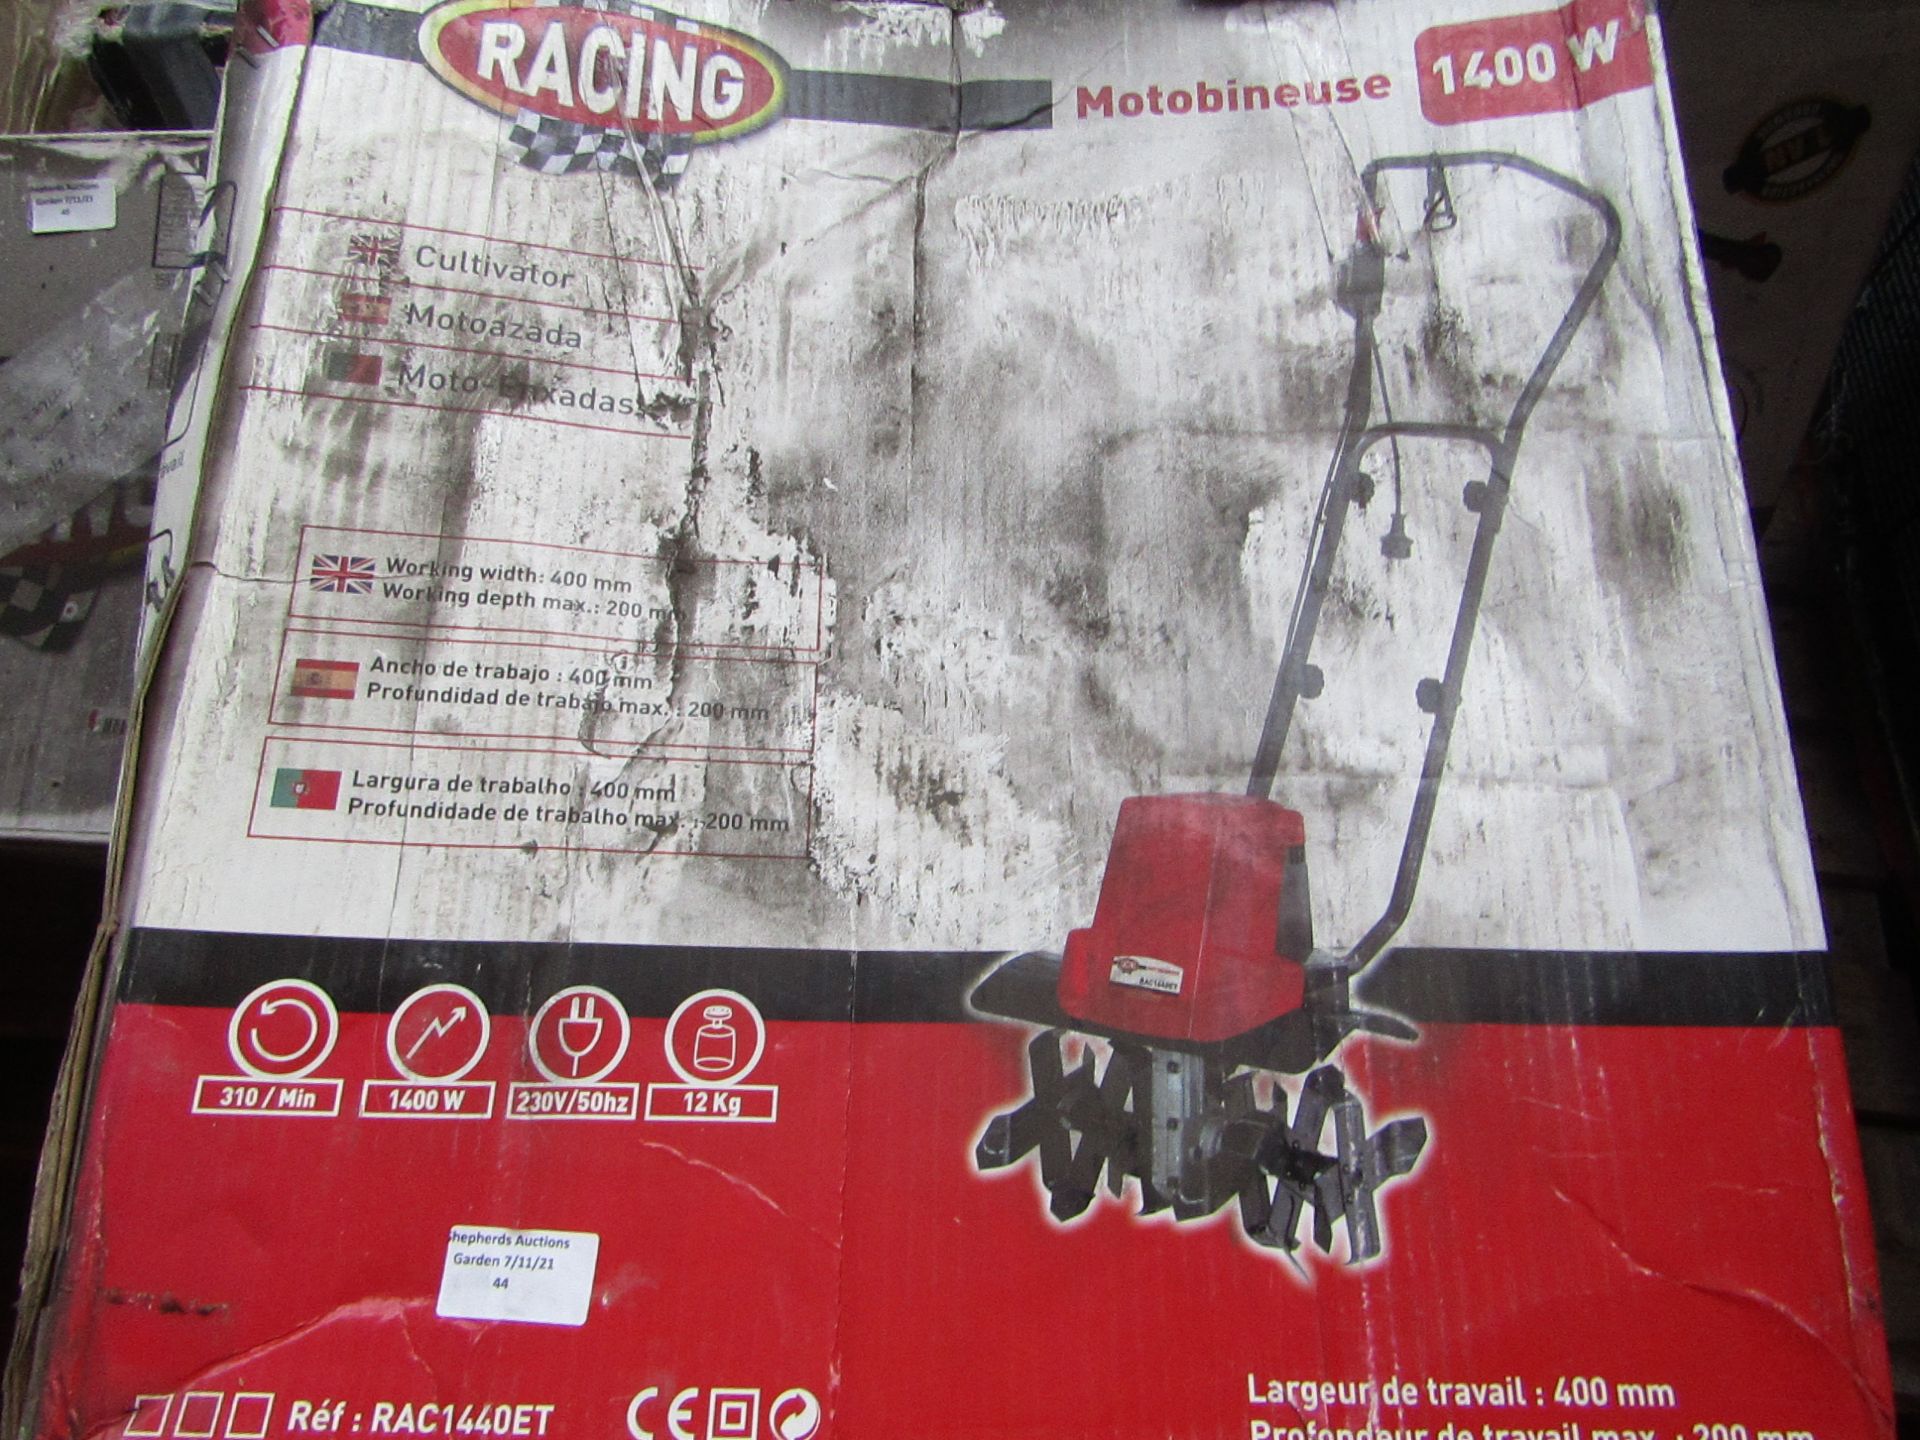 1x Racing - Corded 1400w Electric Cultivator - RAC750ET Unchecked and Untested - RRP £130 @ Leroy